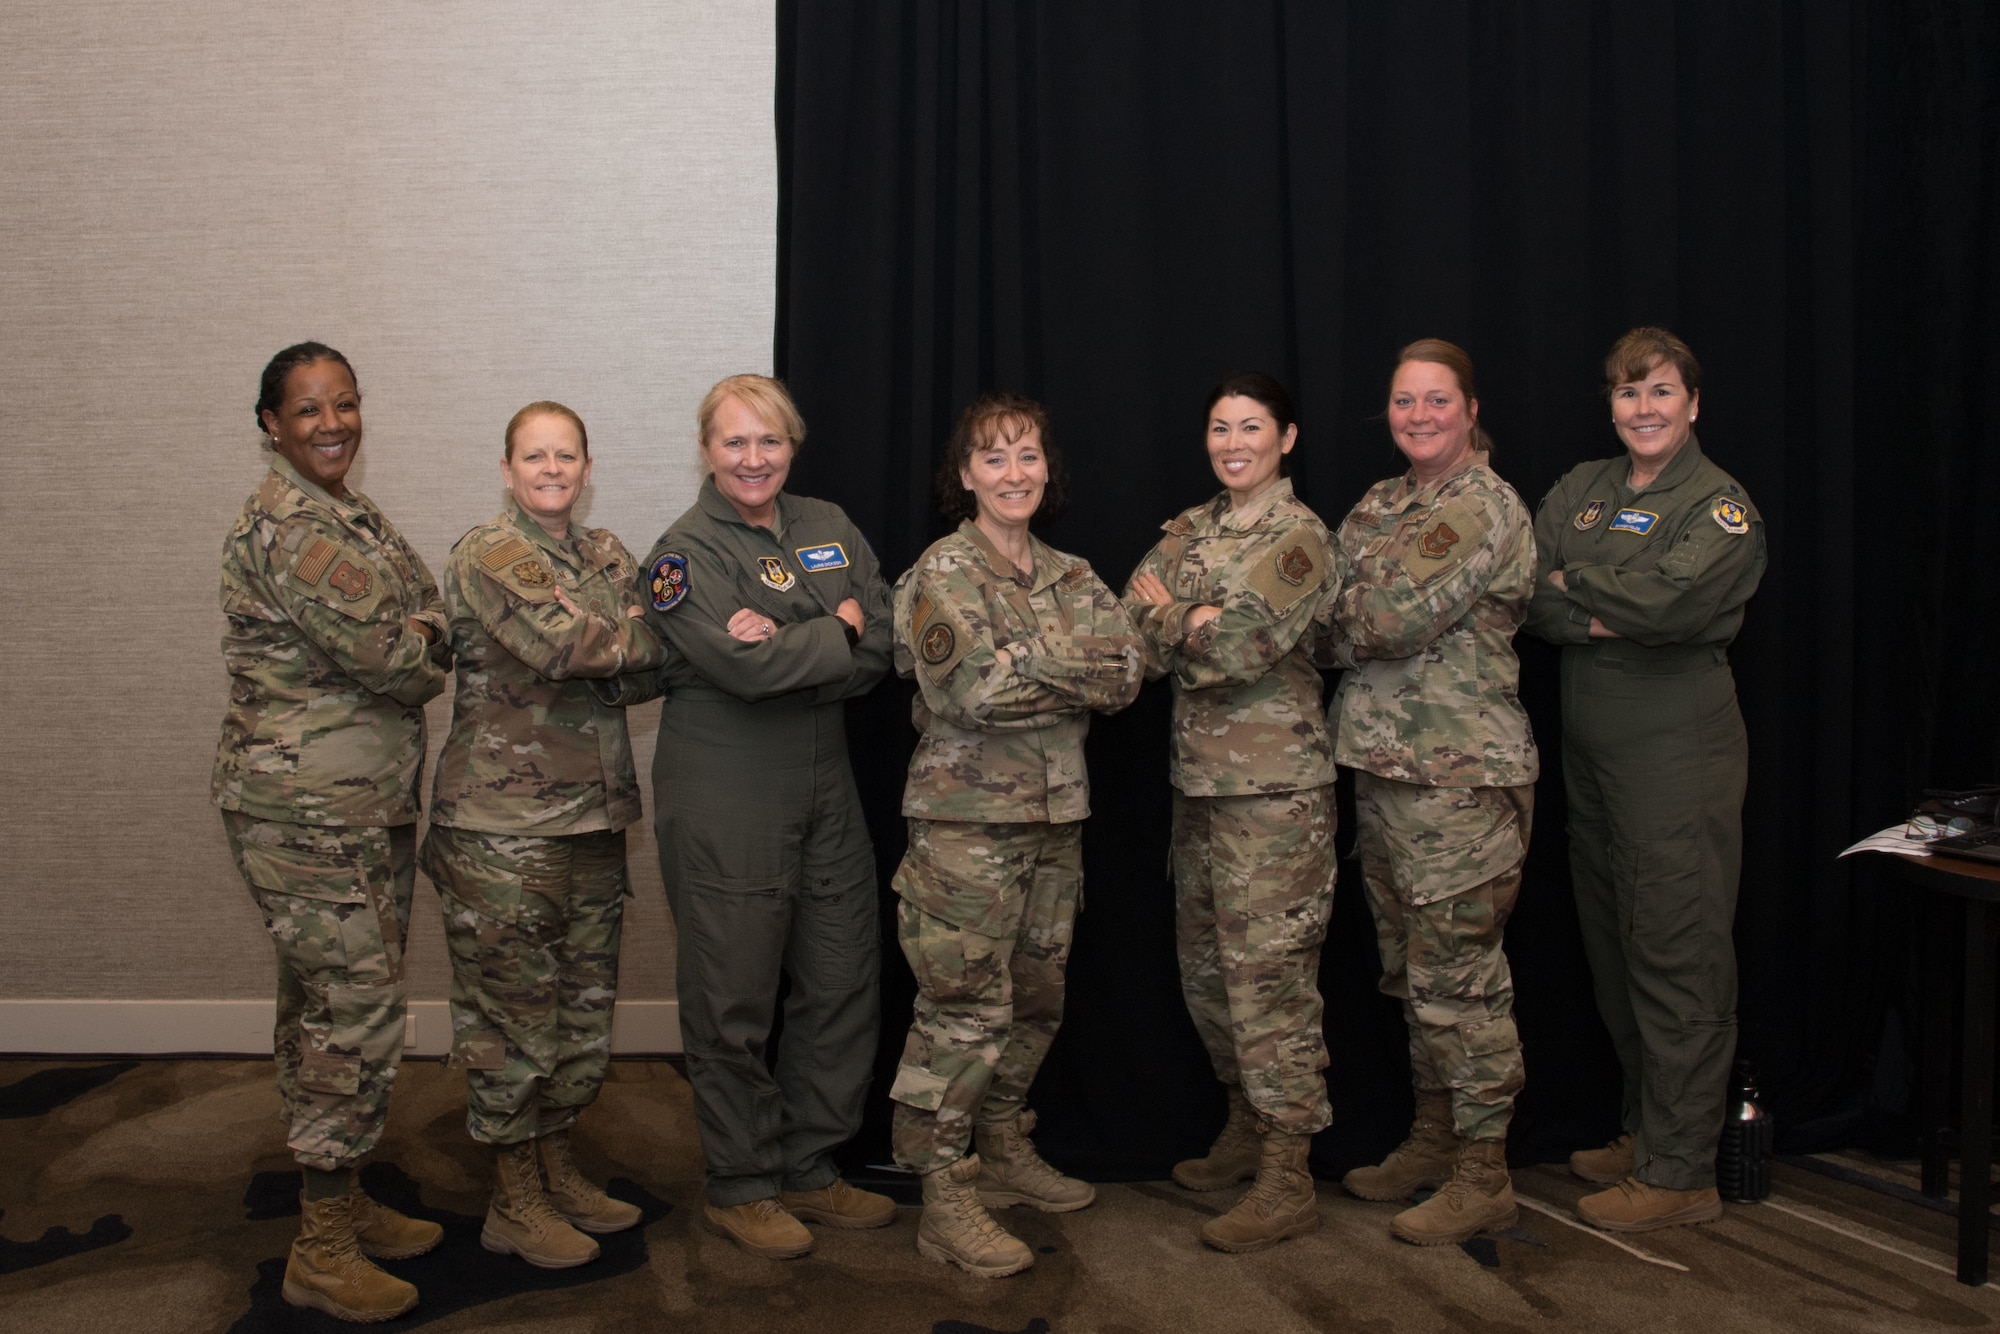 Leaders from across 10th Air Force pose for a picture with Brig Gen Lisa Craig, Air Force Recruiting Service Deputy Commander, during the 2021 Commanders and Command Chiefs Conference in downtown Fort Worth, Texas.